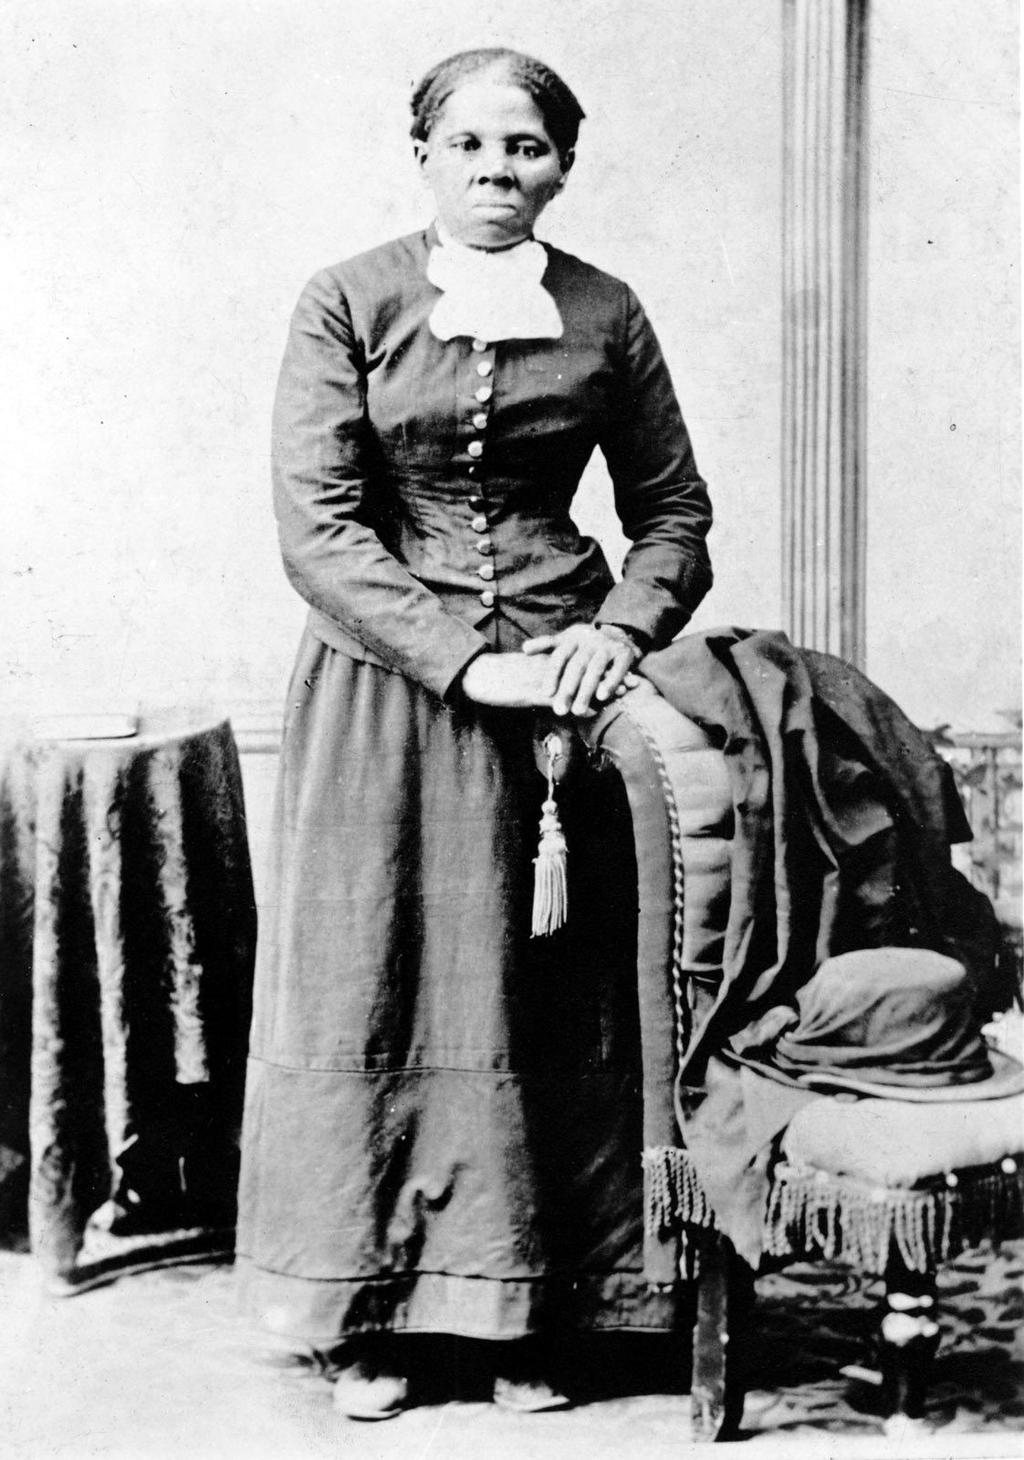 HARRIET TUBMAN BIOGRAPHY Harriet Tubman is best remembered as one of America s most famous conductors on the Underground Railroad.